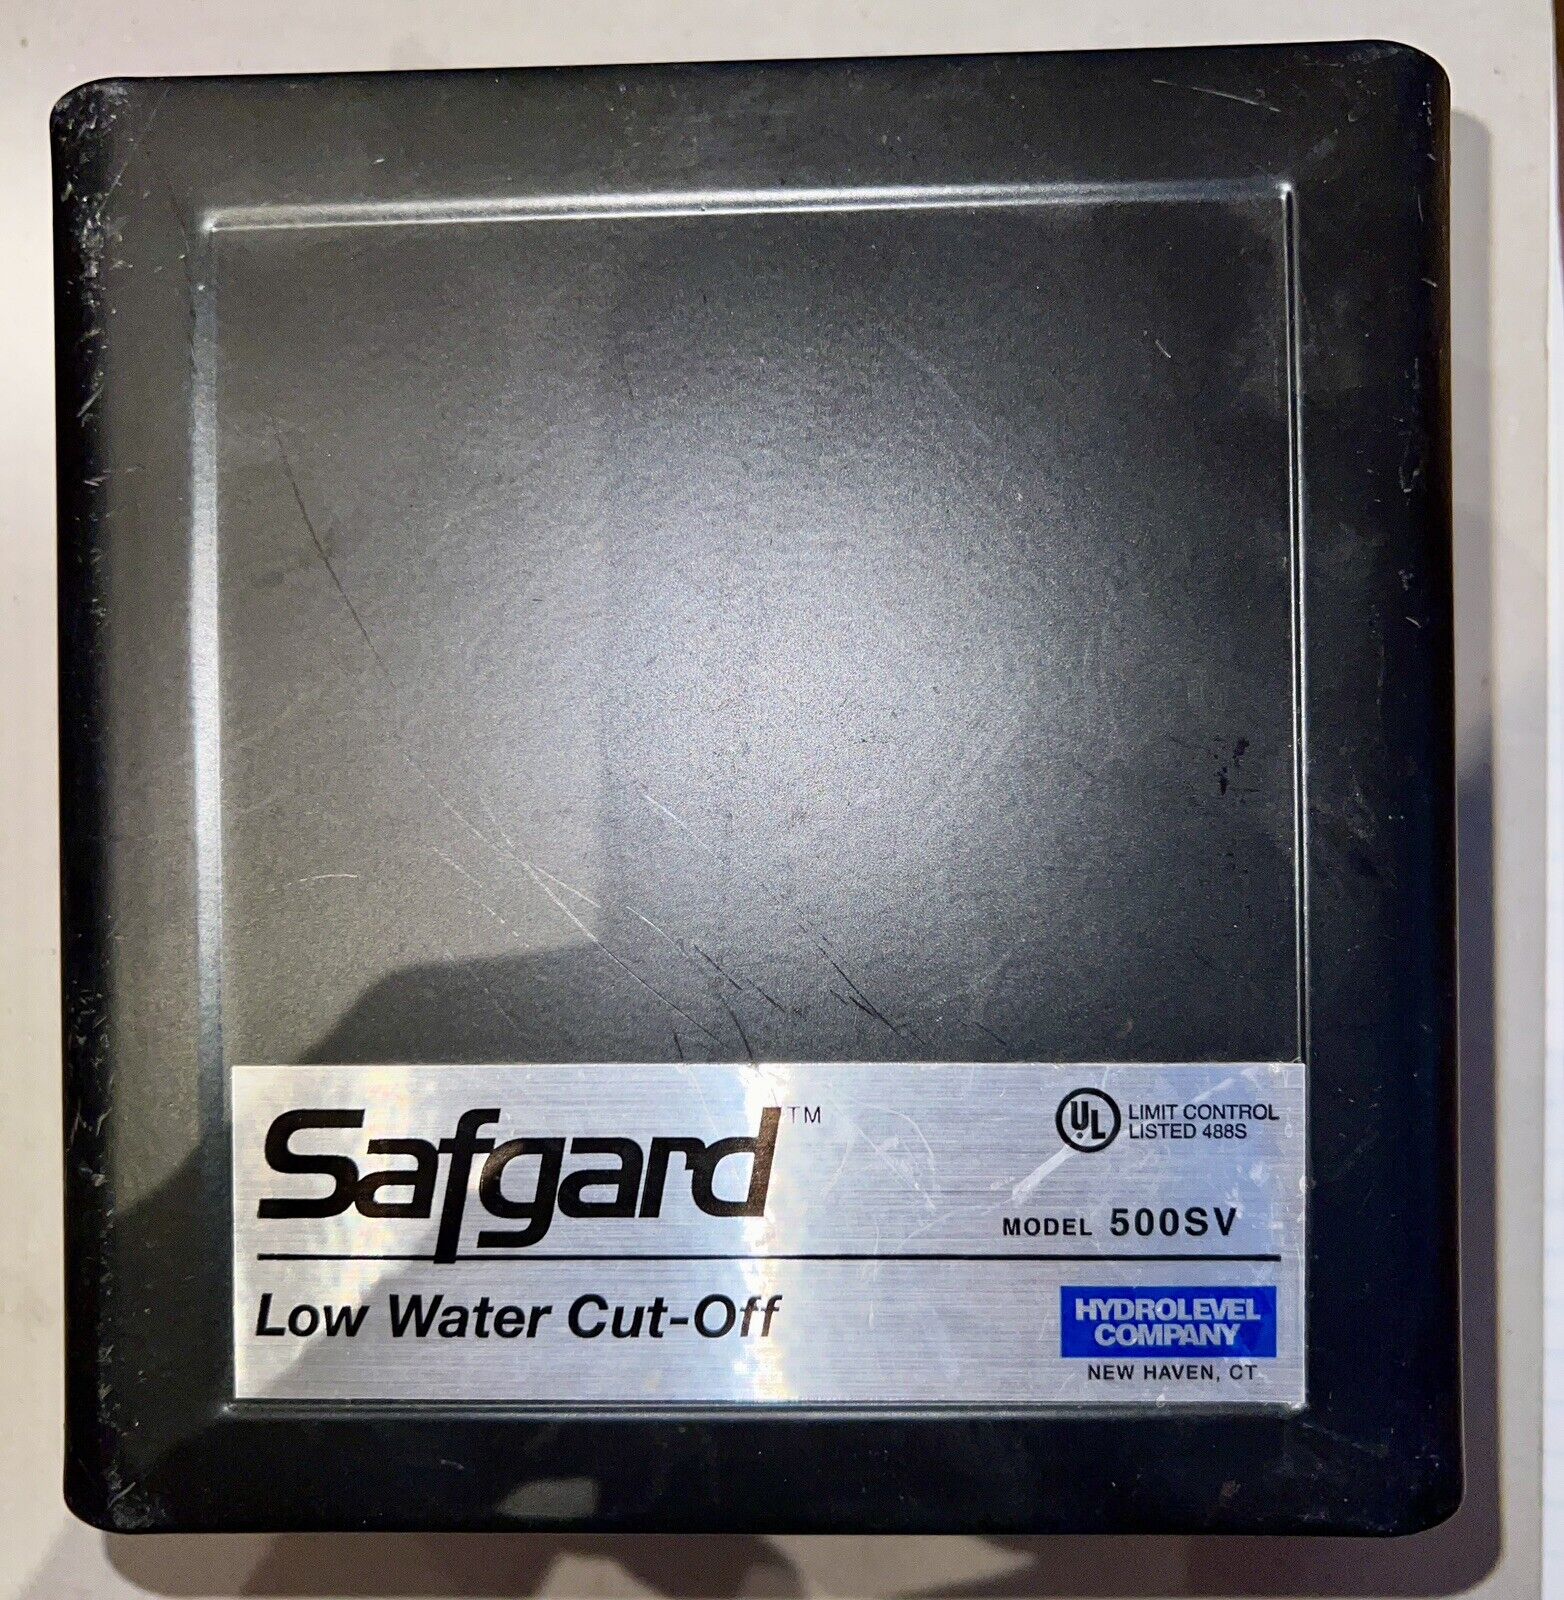 Safgard Model 500SV Low Water Cut-off Hydrolevel for Water Boiler Module Only